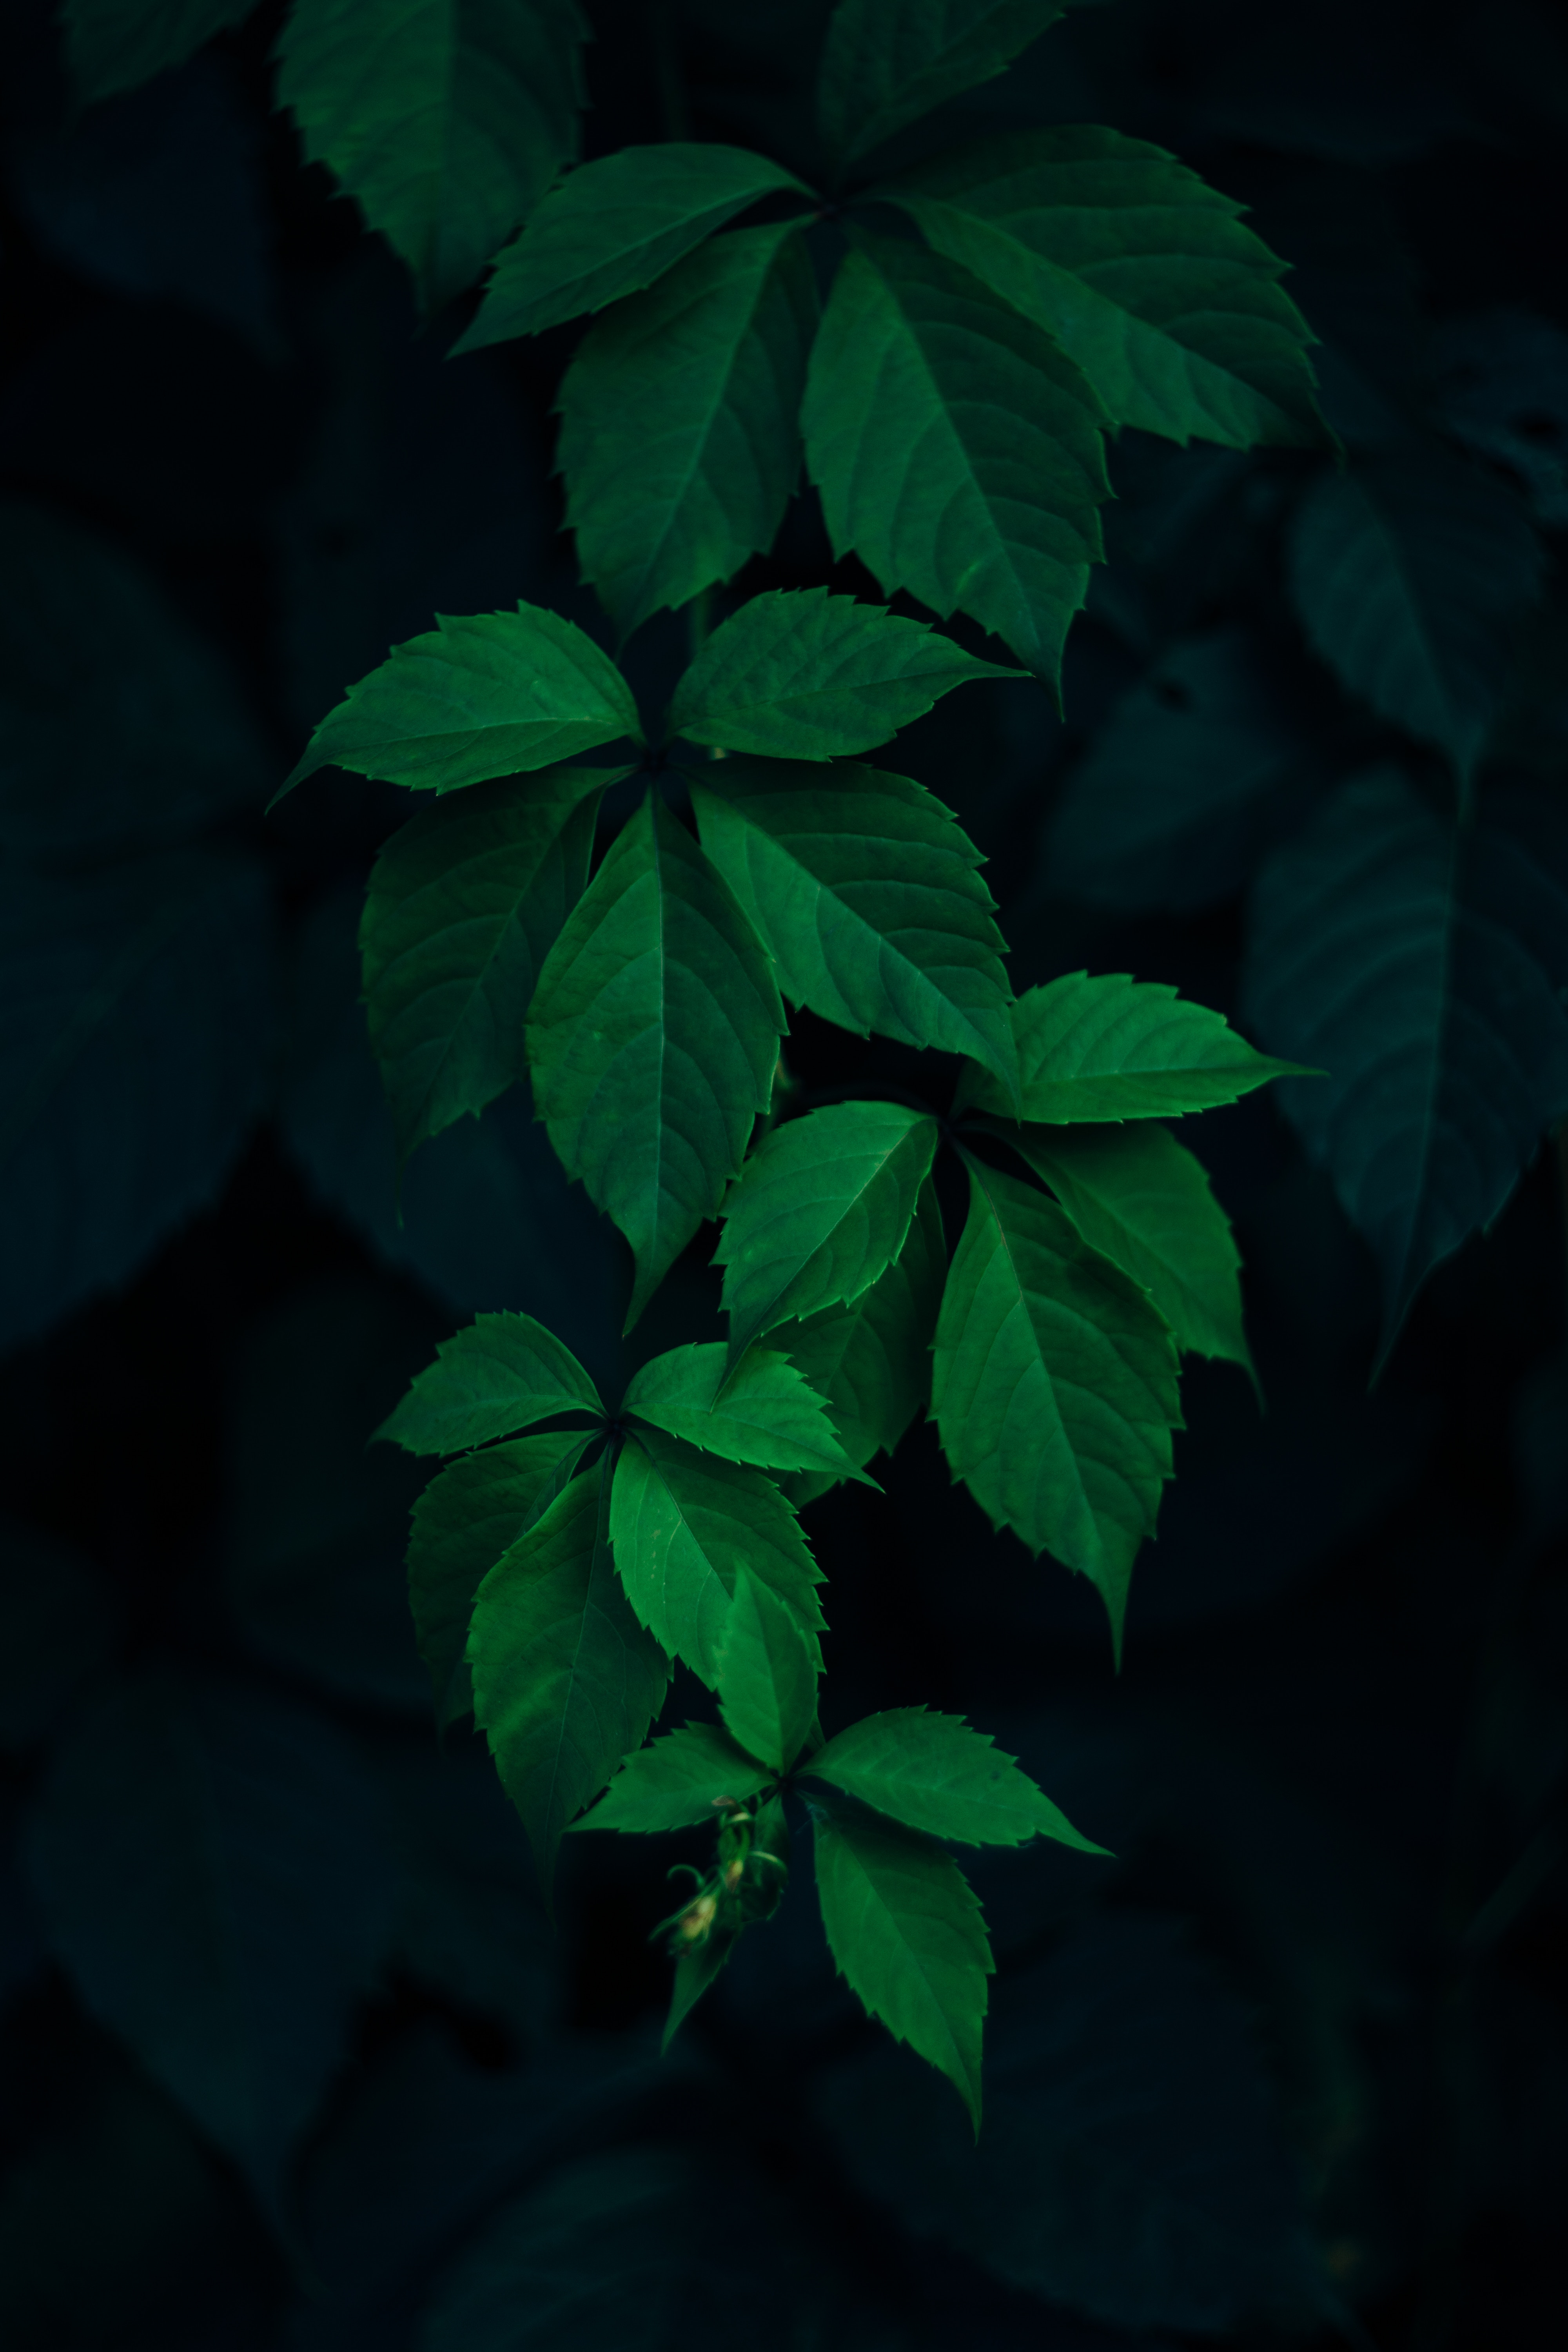 leaves, green, branches, dark background, nature